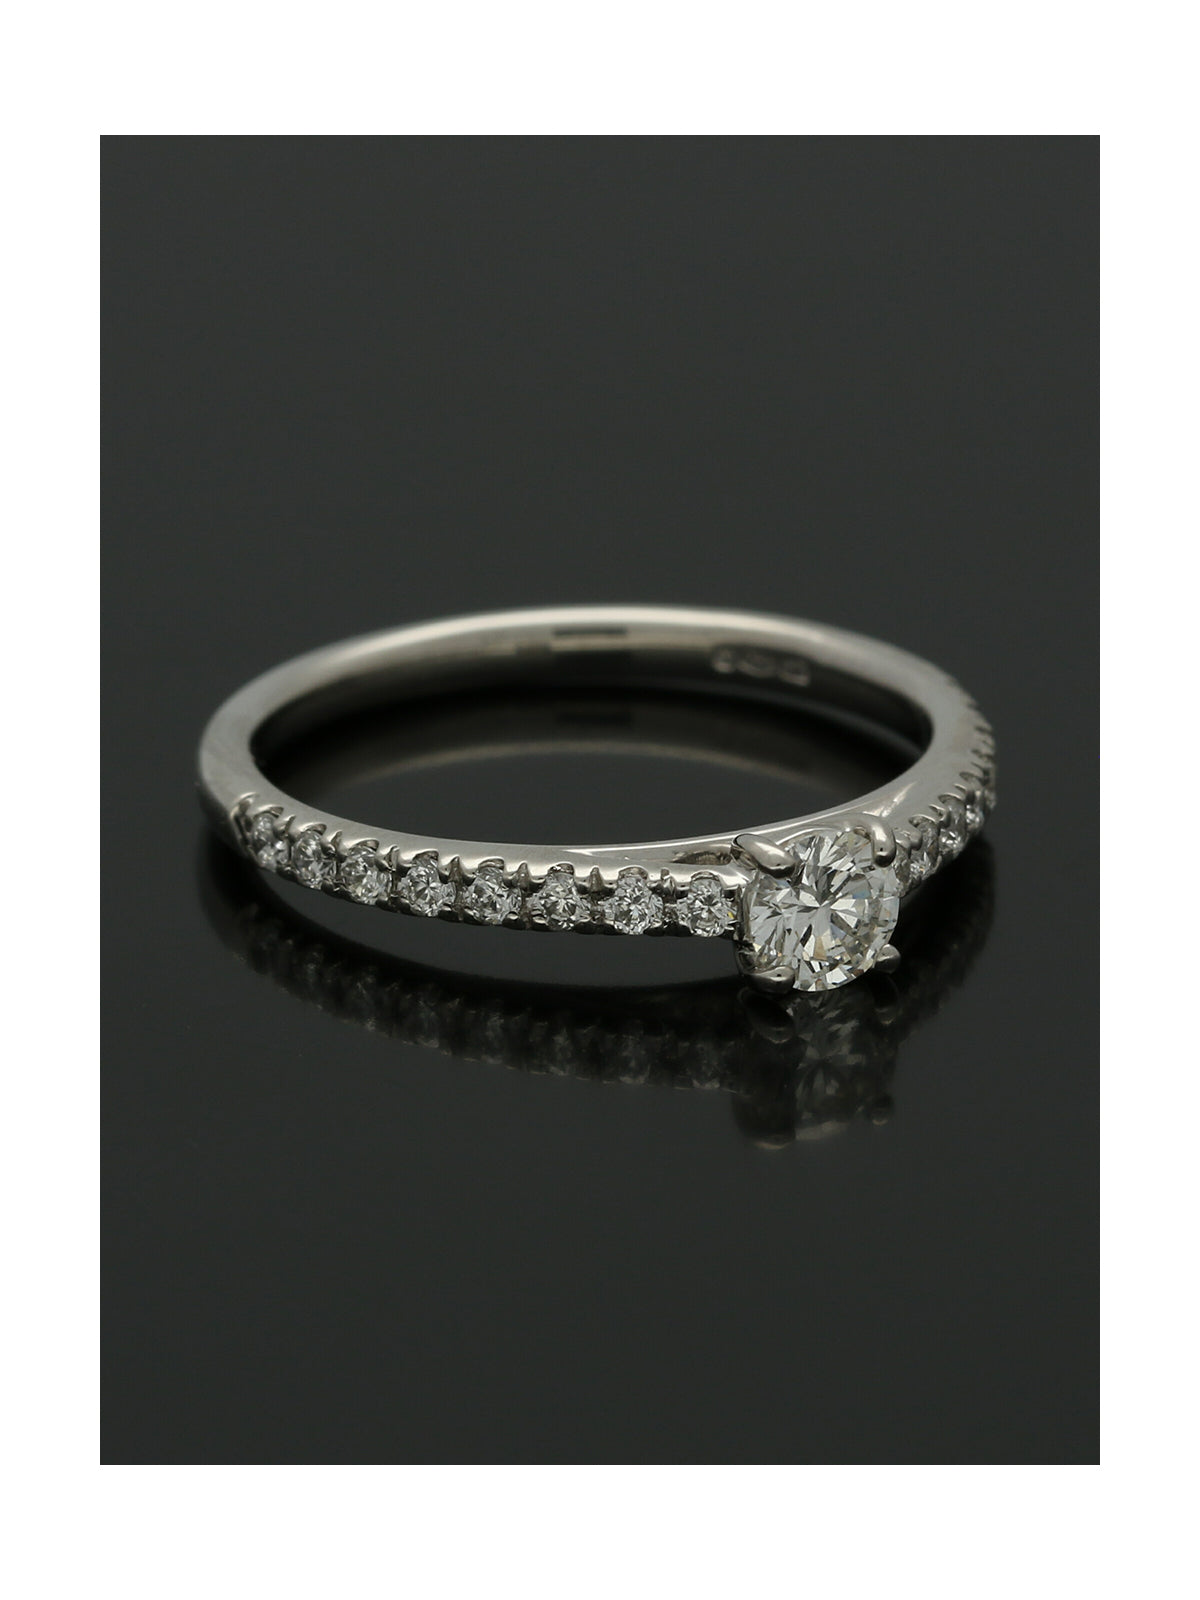 Diamond Solitaire Engagement Ring "The Catherine Collection" 0.25ct Round Brilliant Cut in Platinum with Diamond Shoulders